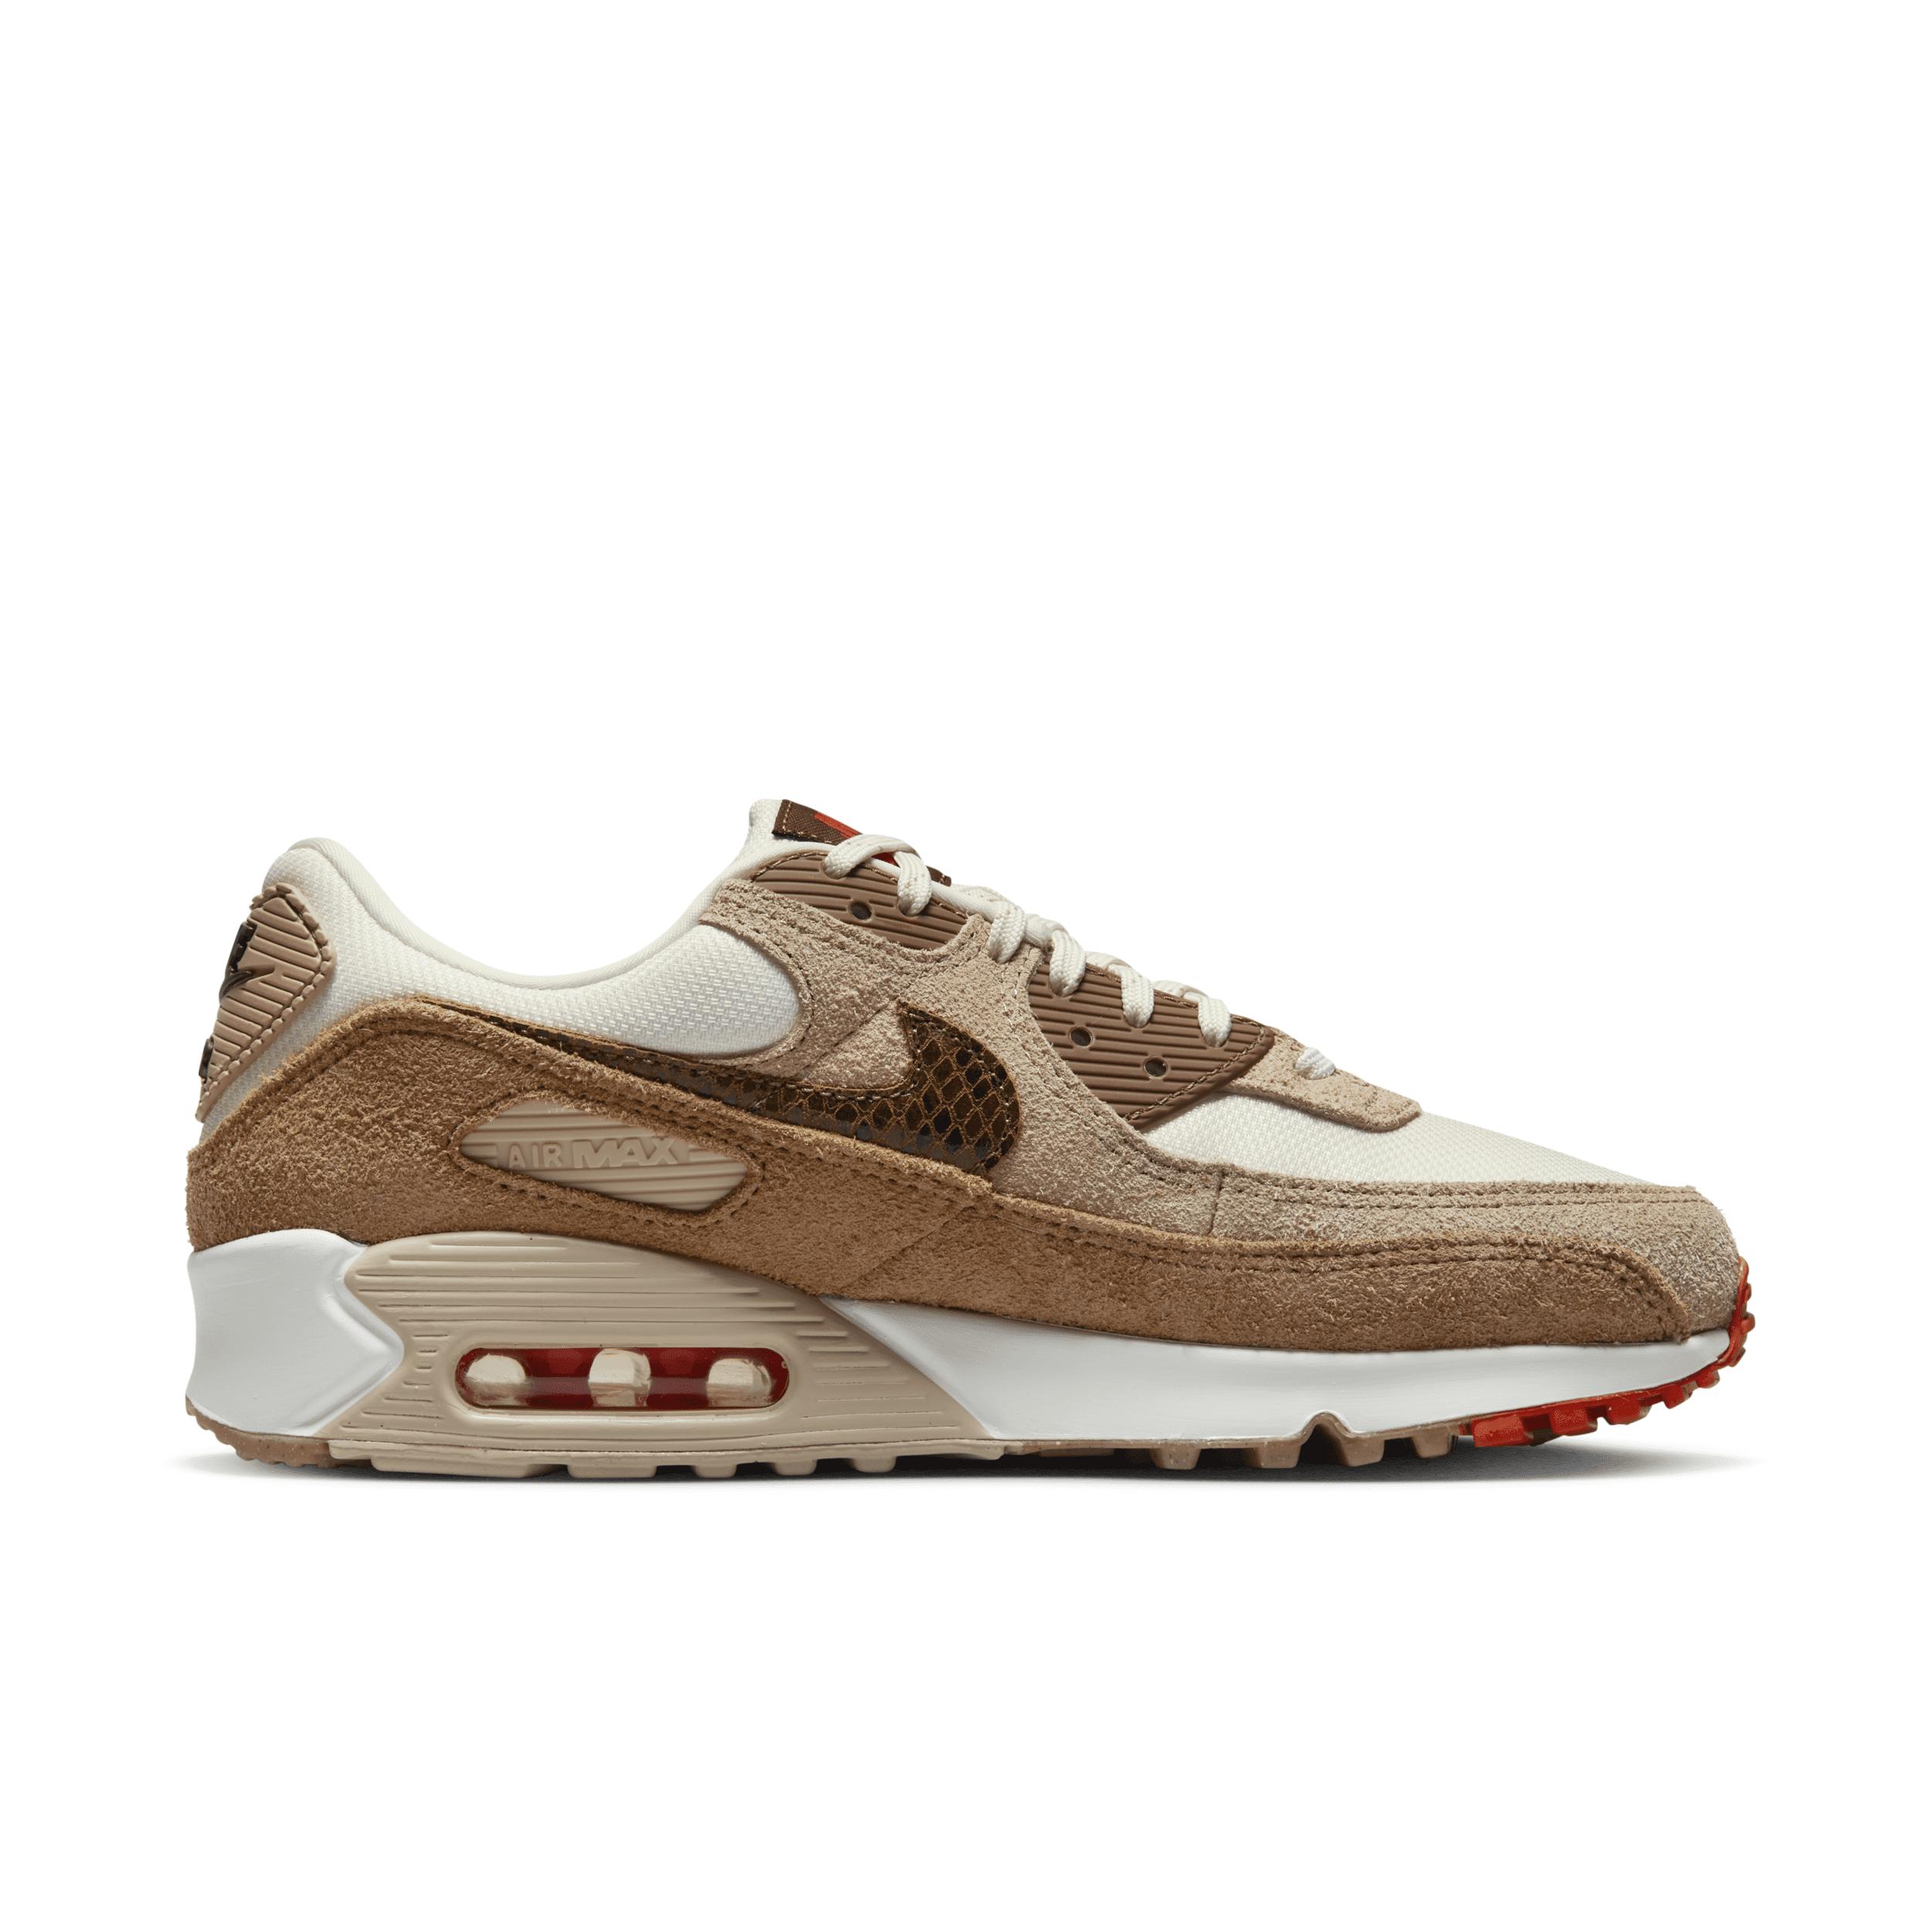 Nike Air Max 90 Amd Shoes in Brown | Lyst